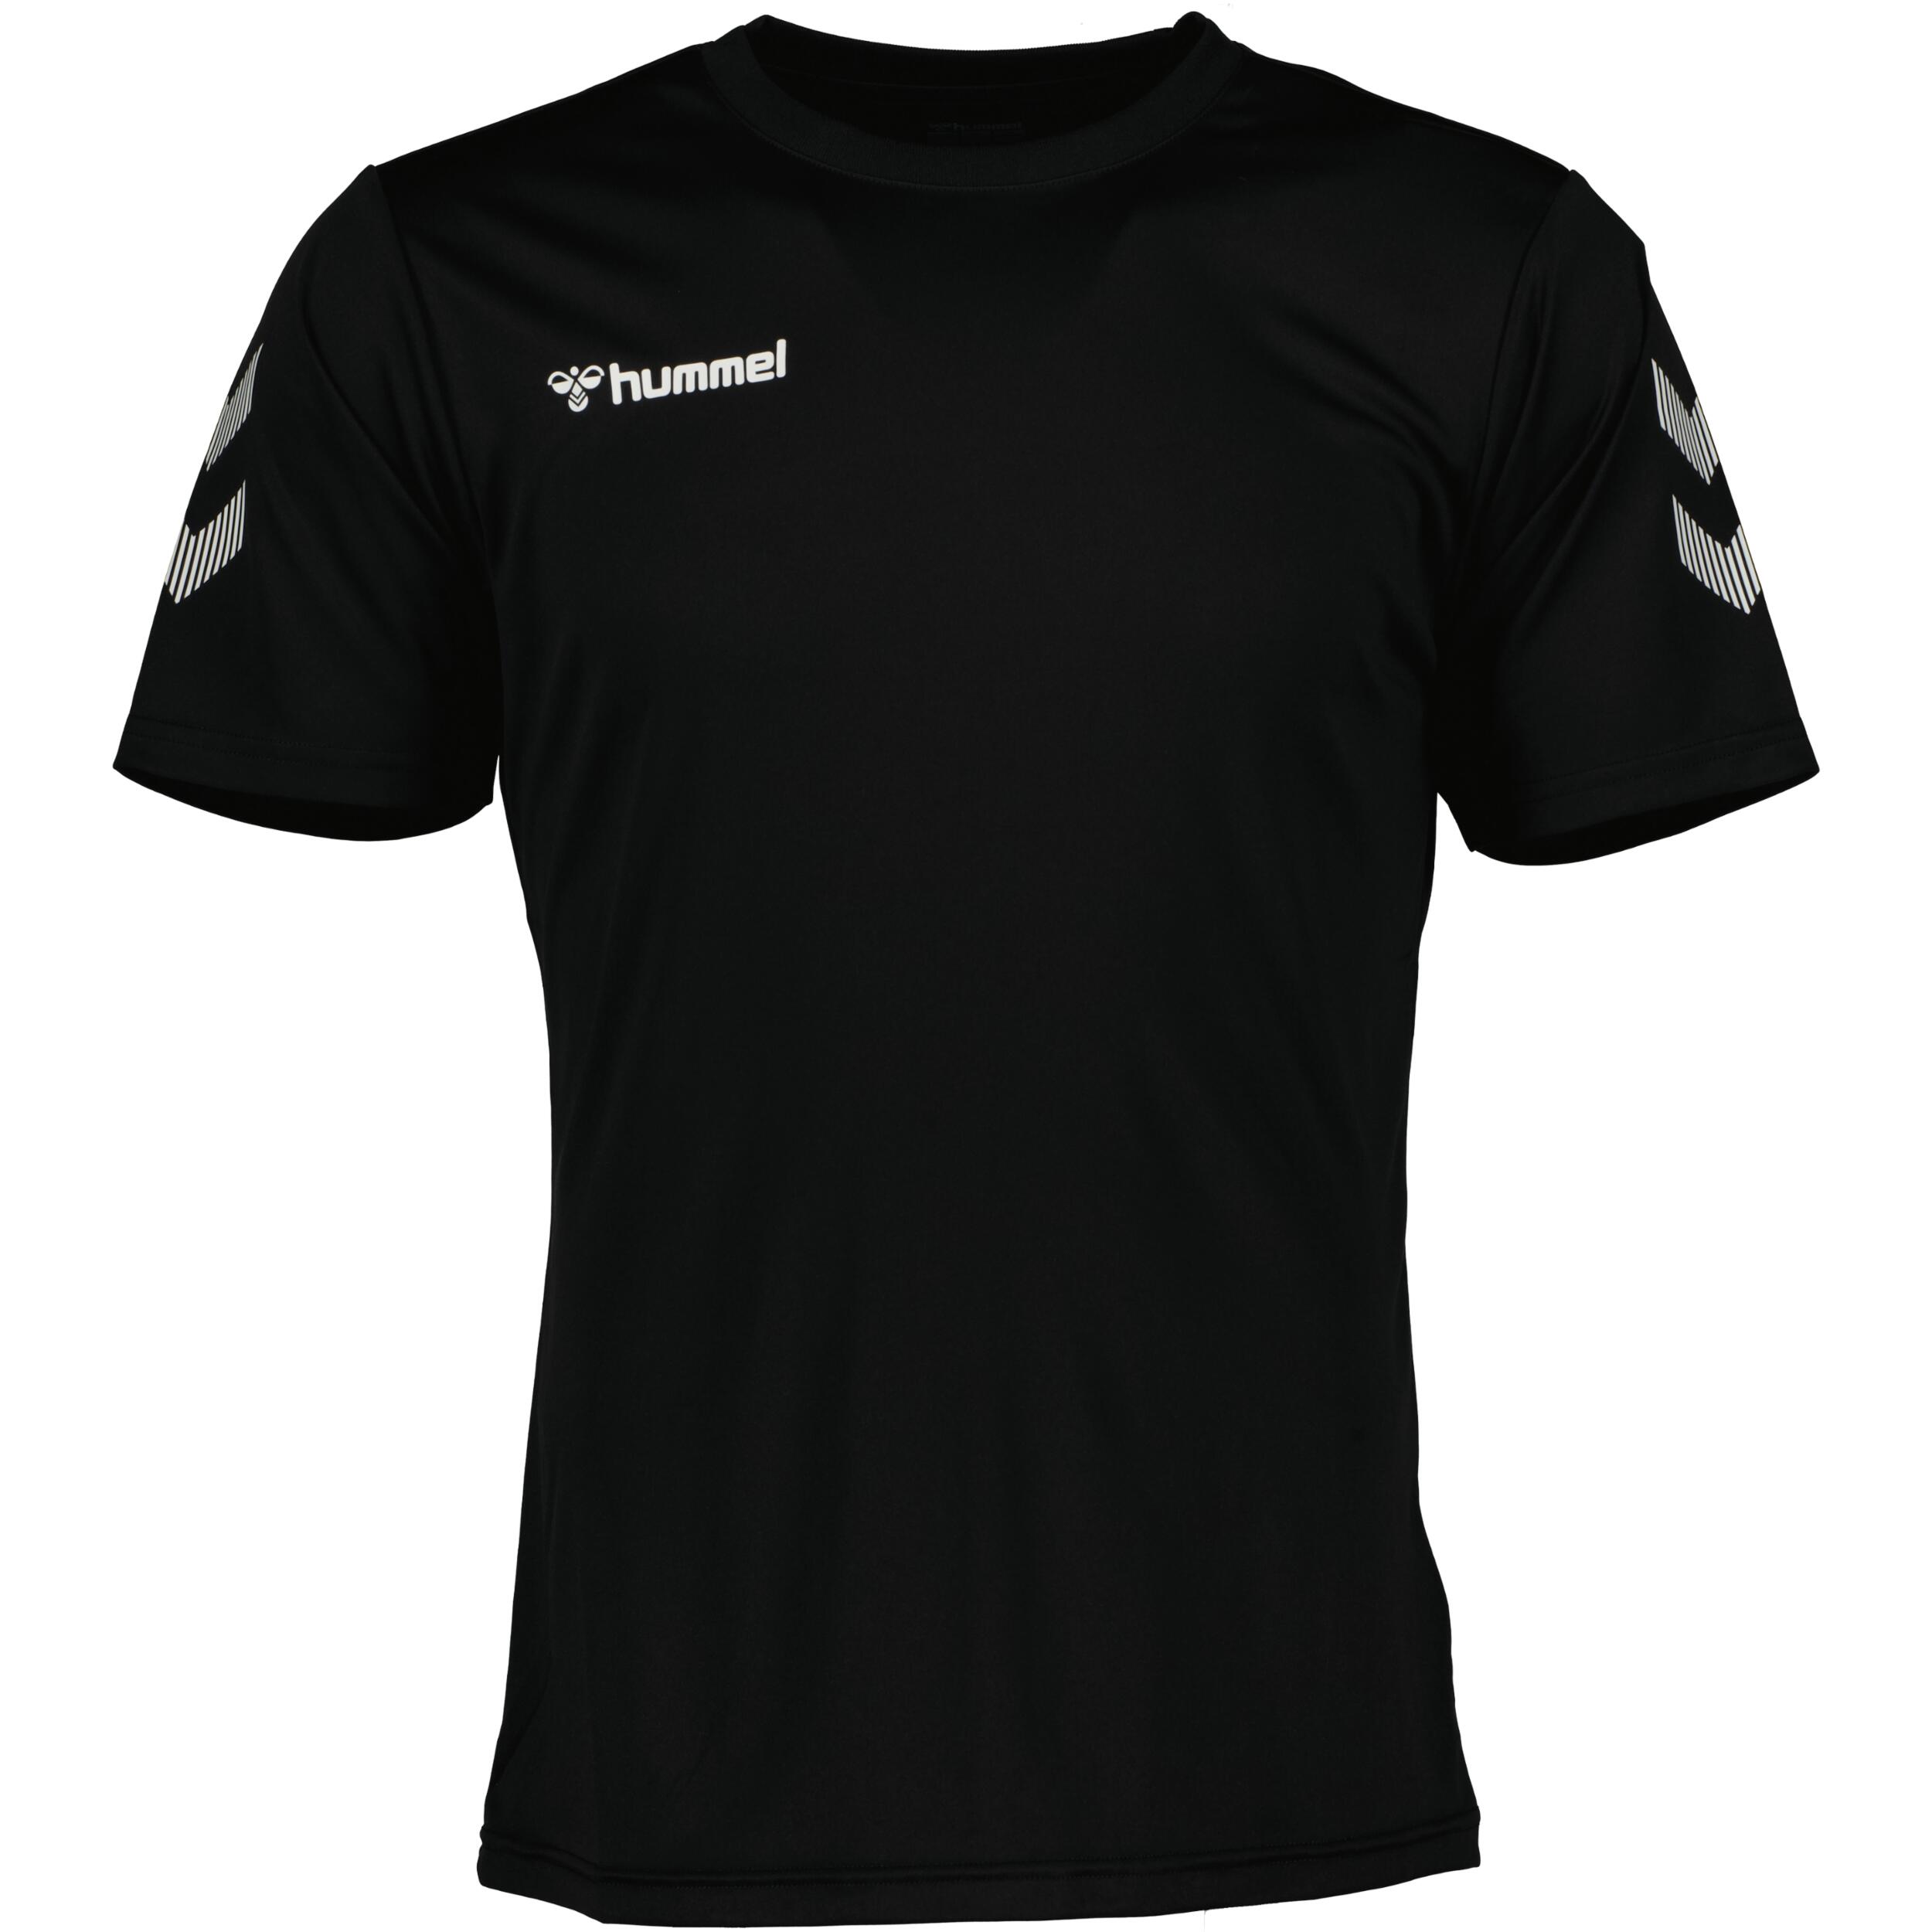 Solo jersey for men, great for football, in black 1/3